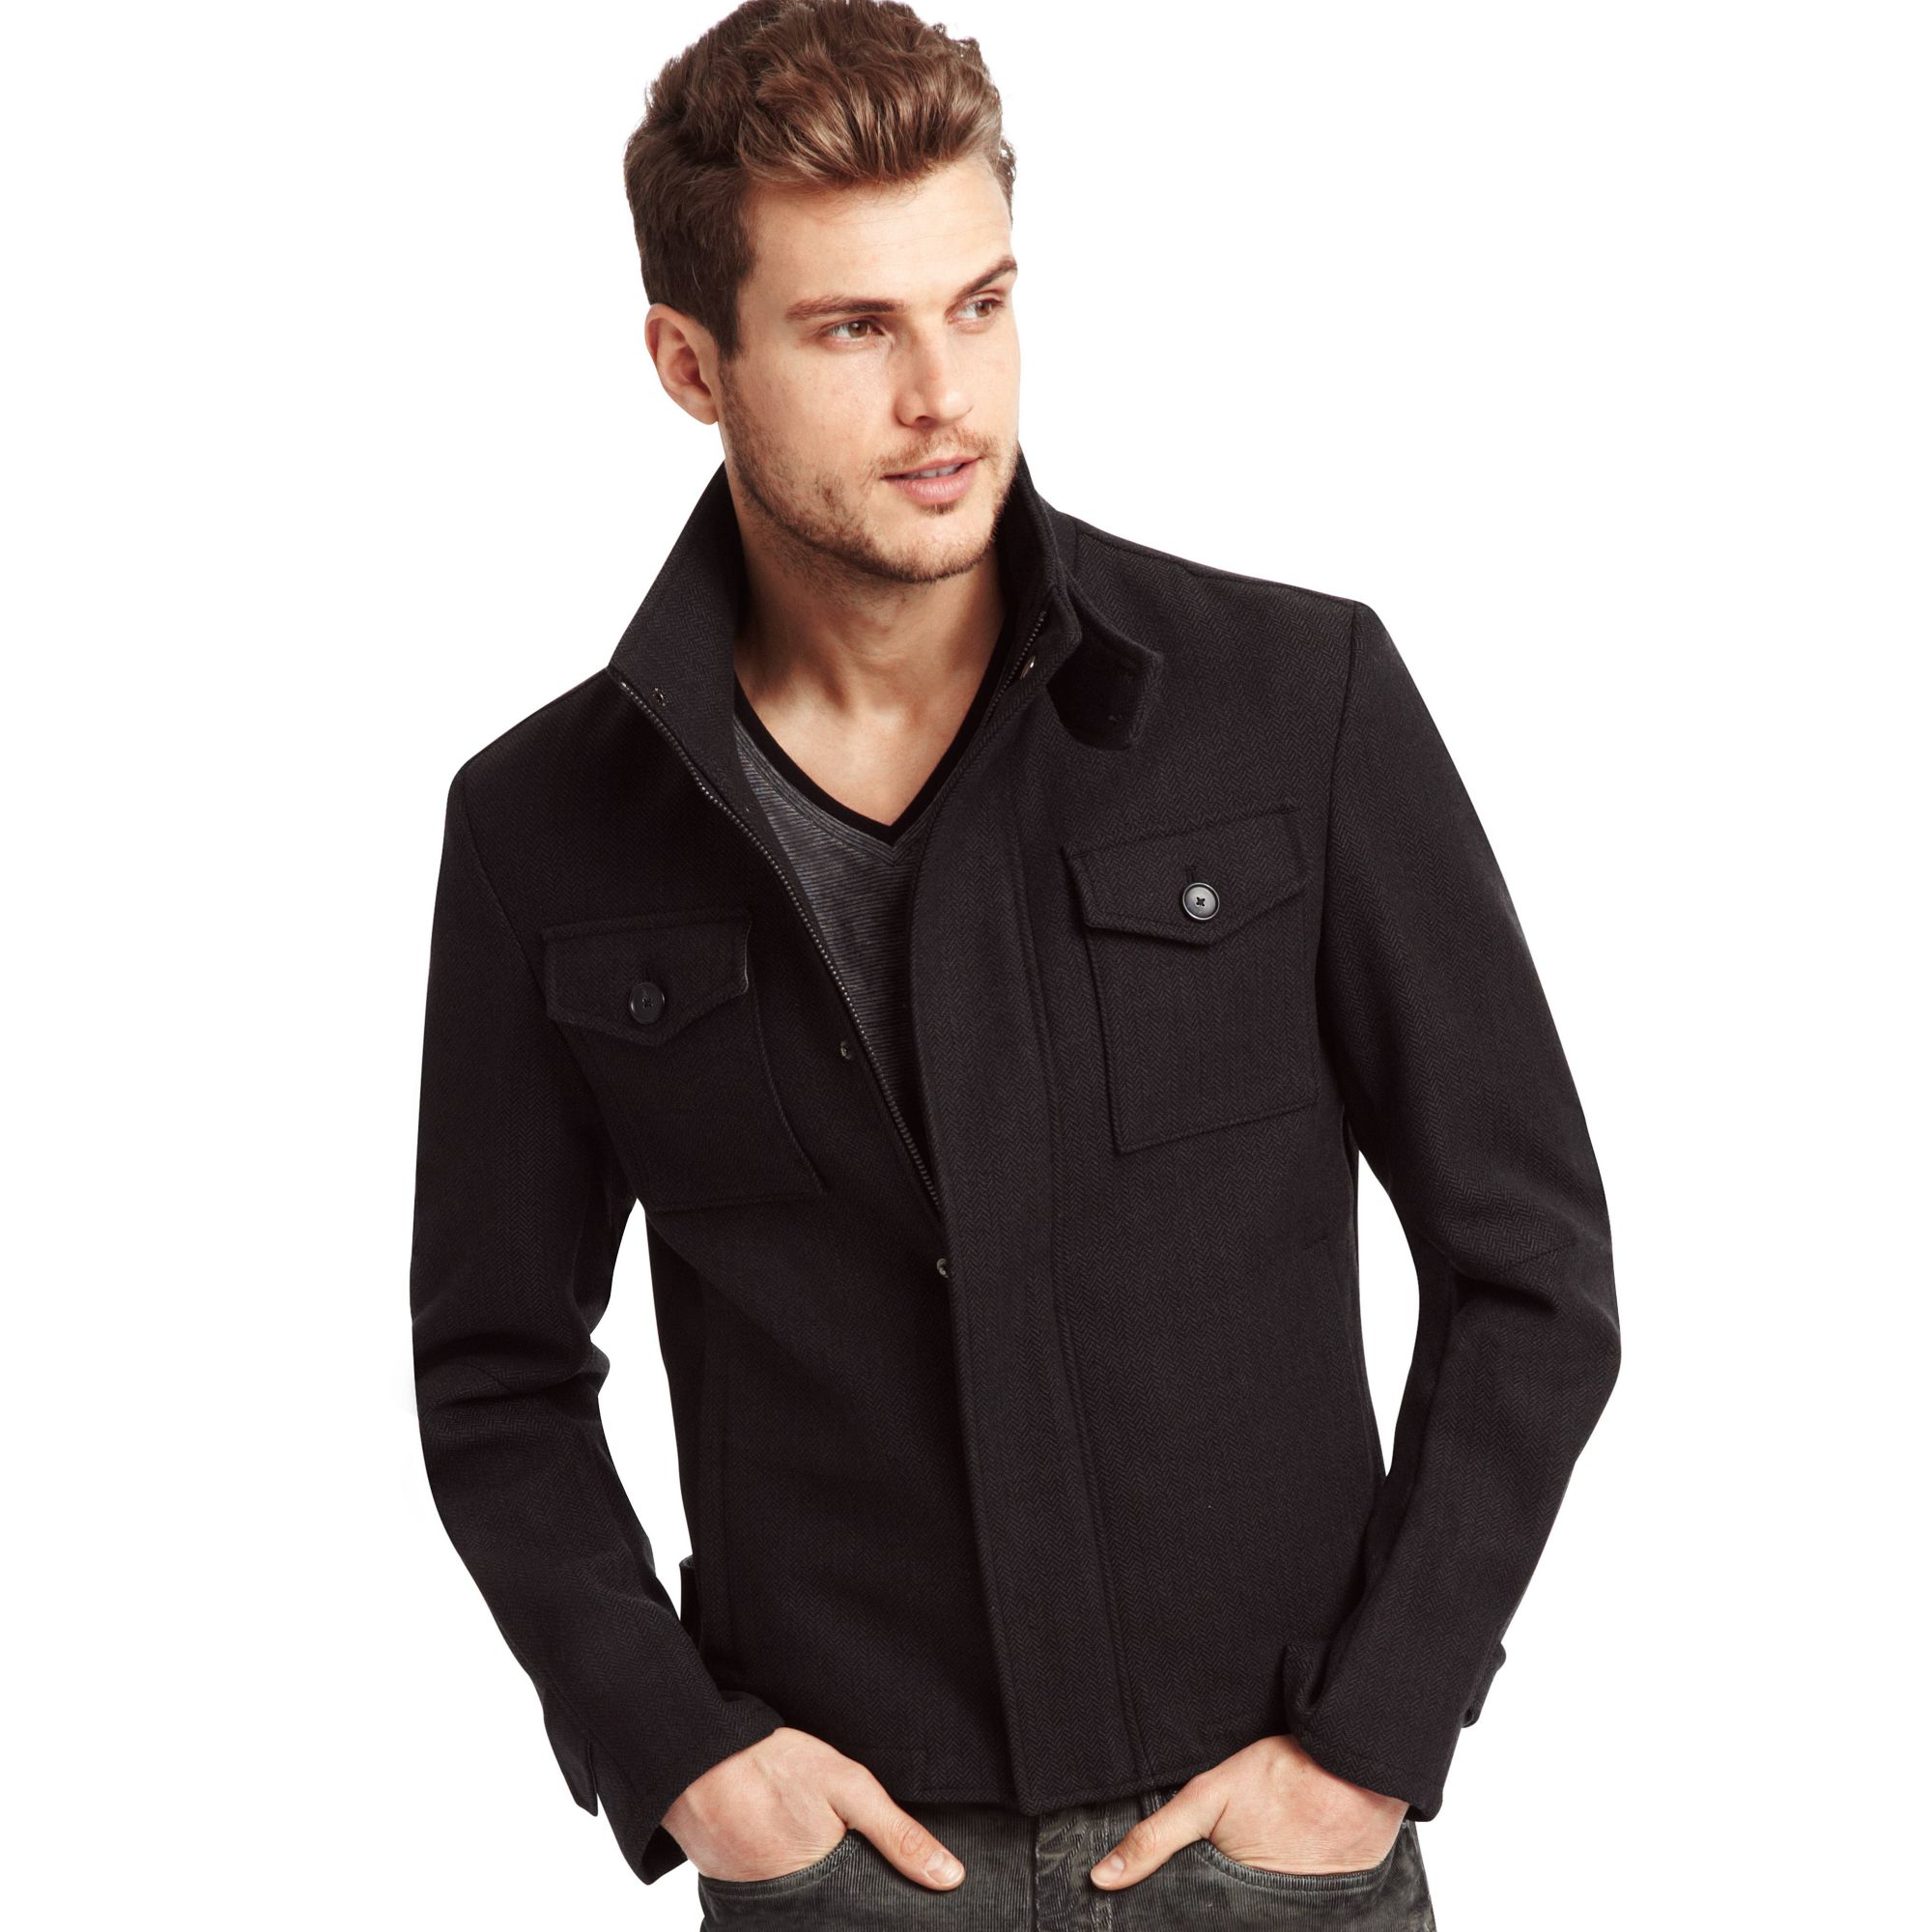 Lyst - Kenneth Cole Blouson Military Jacket in Black for Men